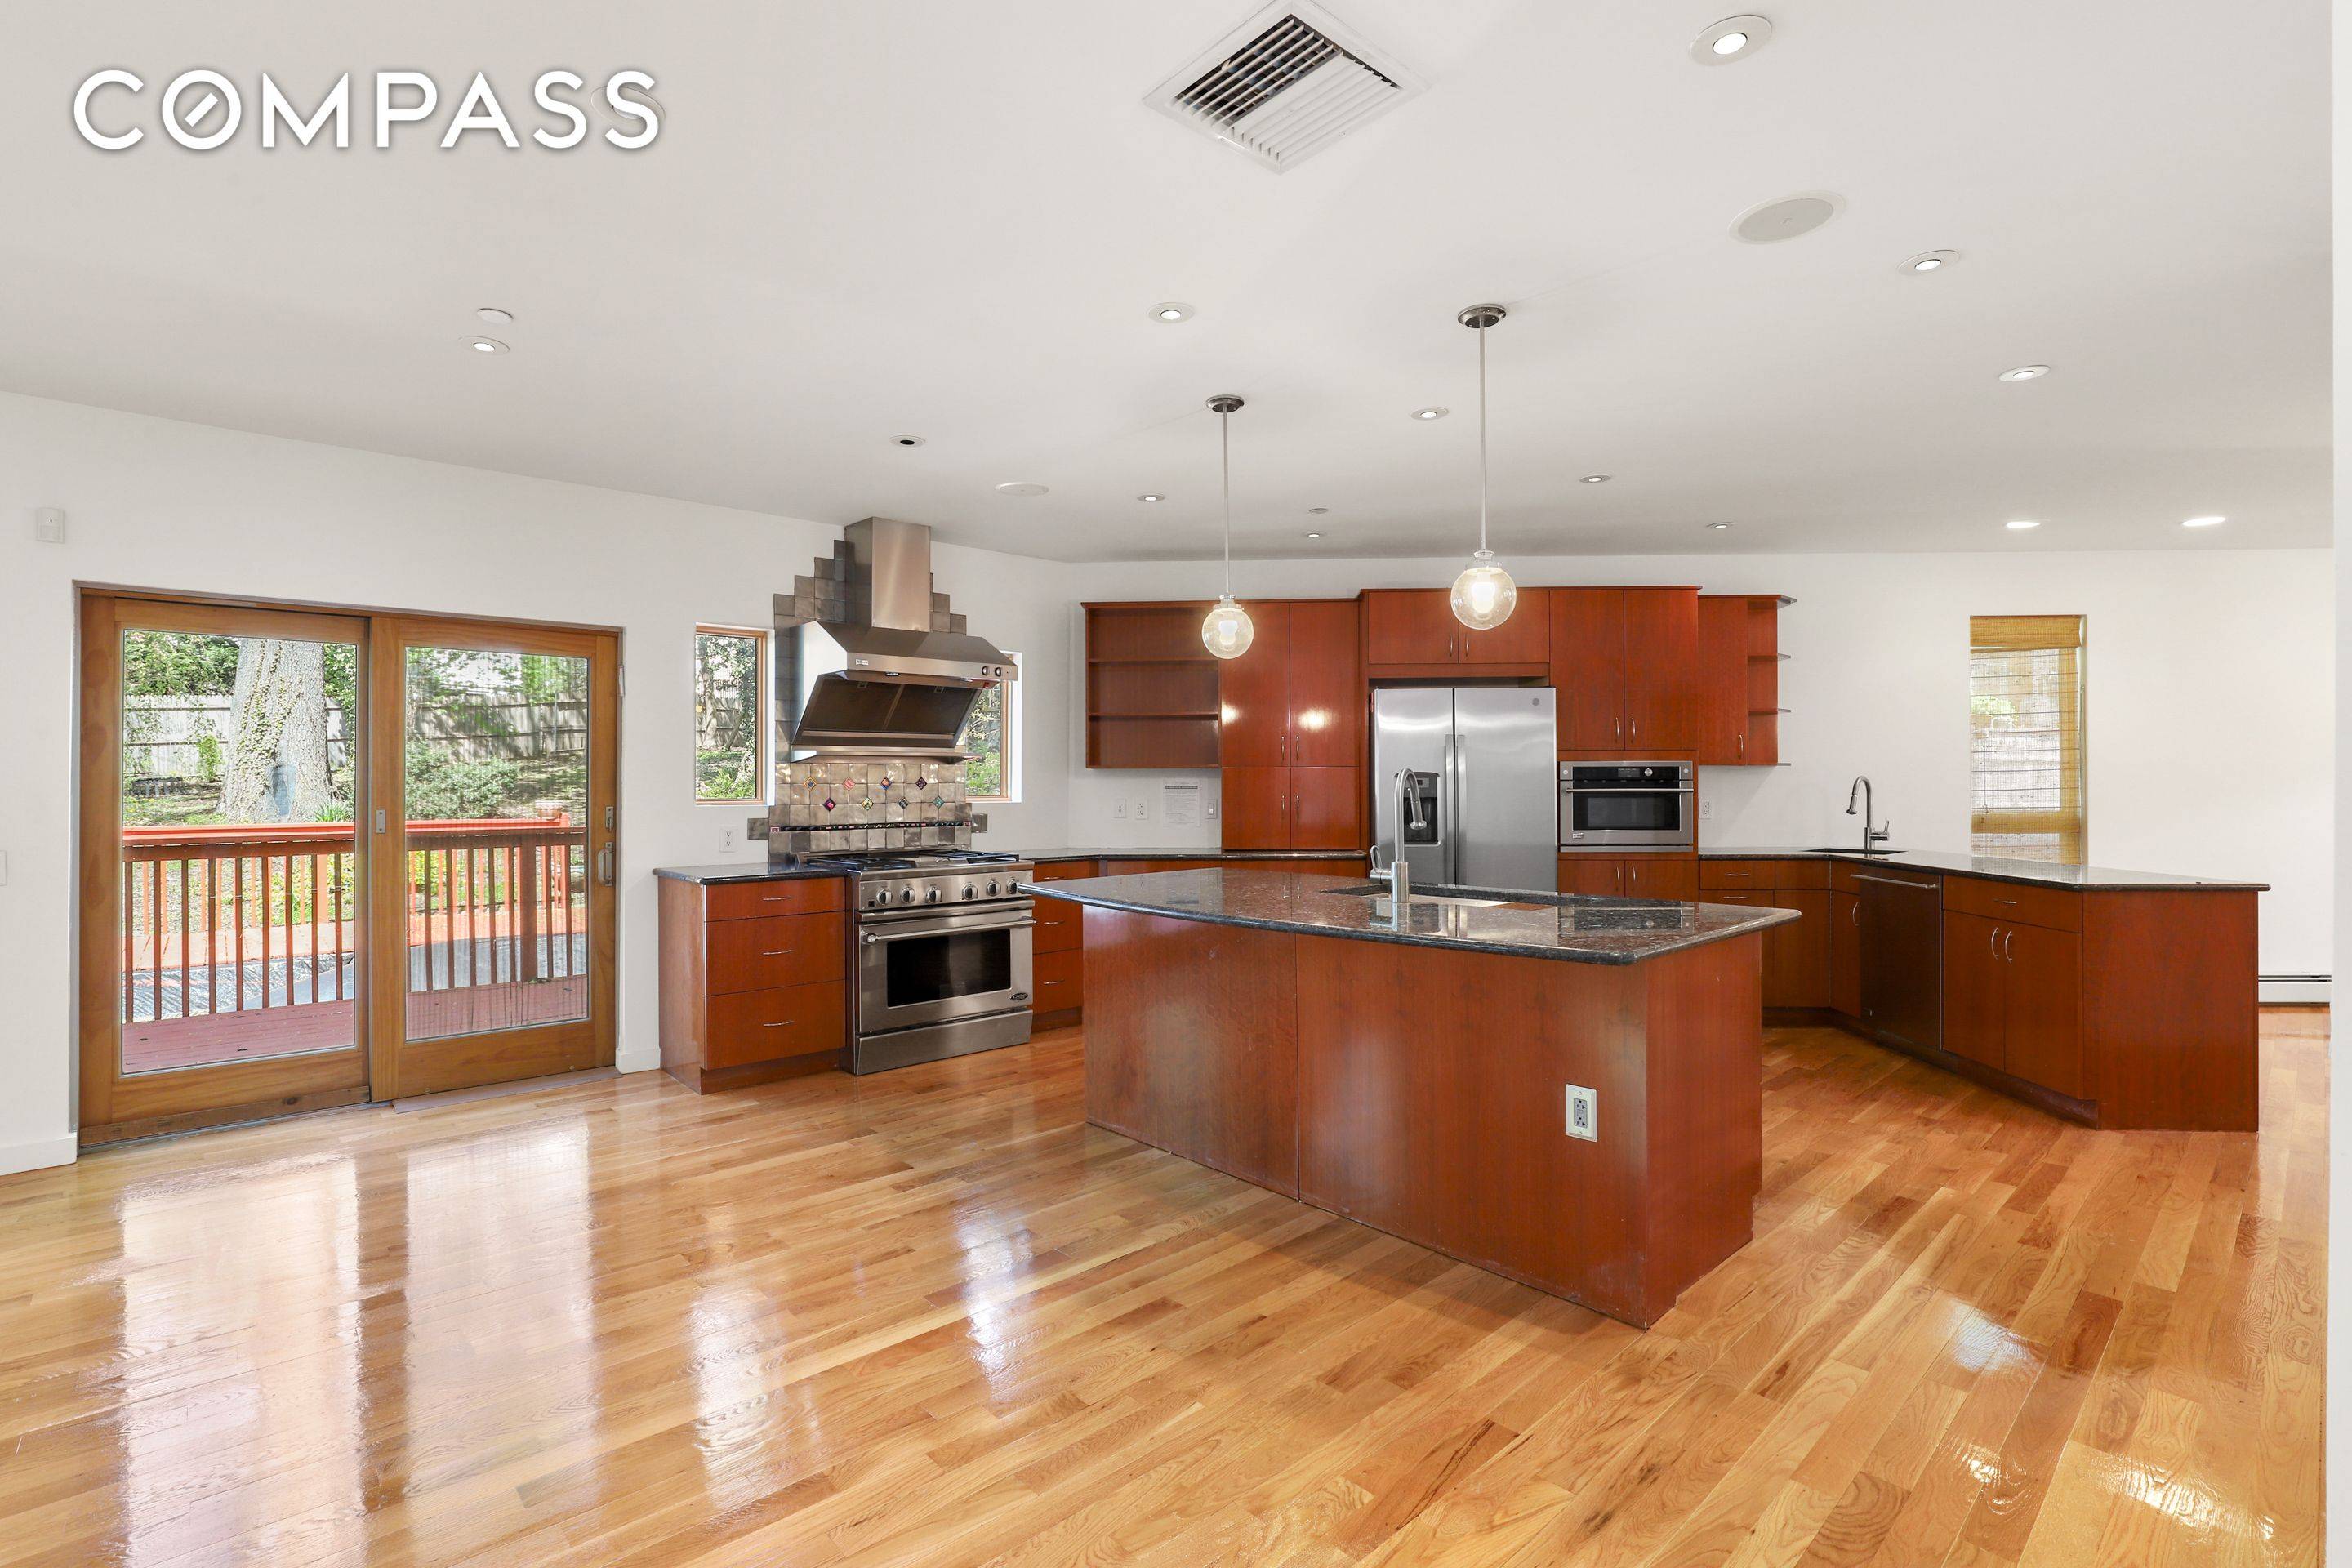 Modern Contemporary home that features 5 Bedroom, 4 full and 2 half bathrooms and is located just 15 minutes from Mid Town Manhattan.